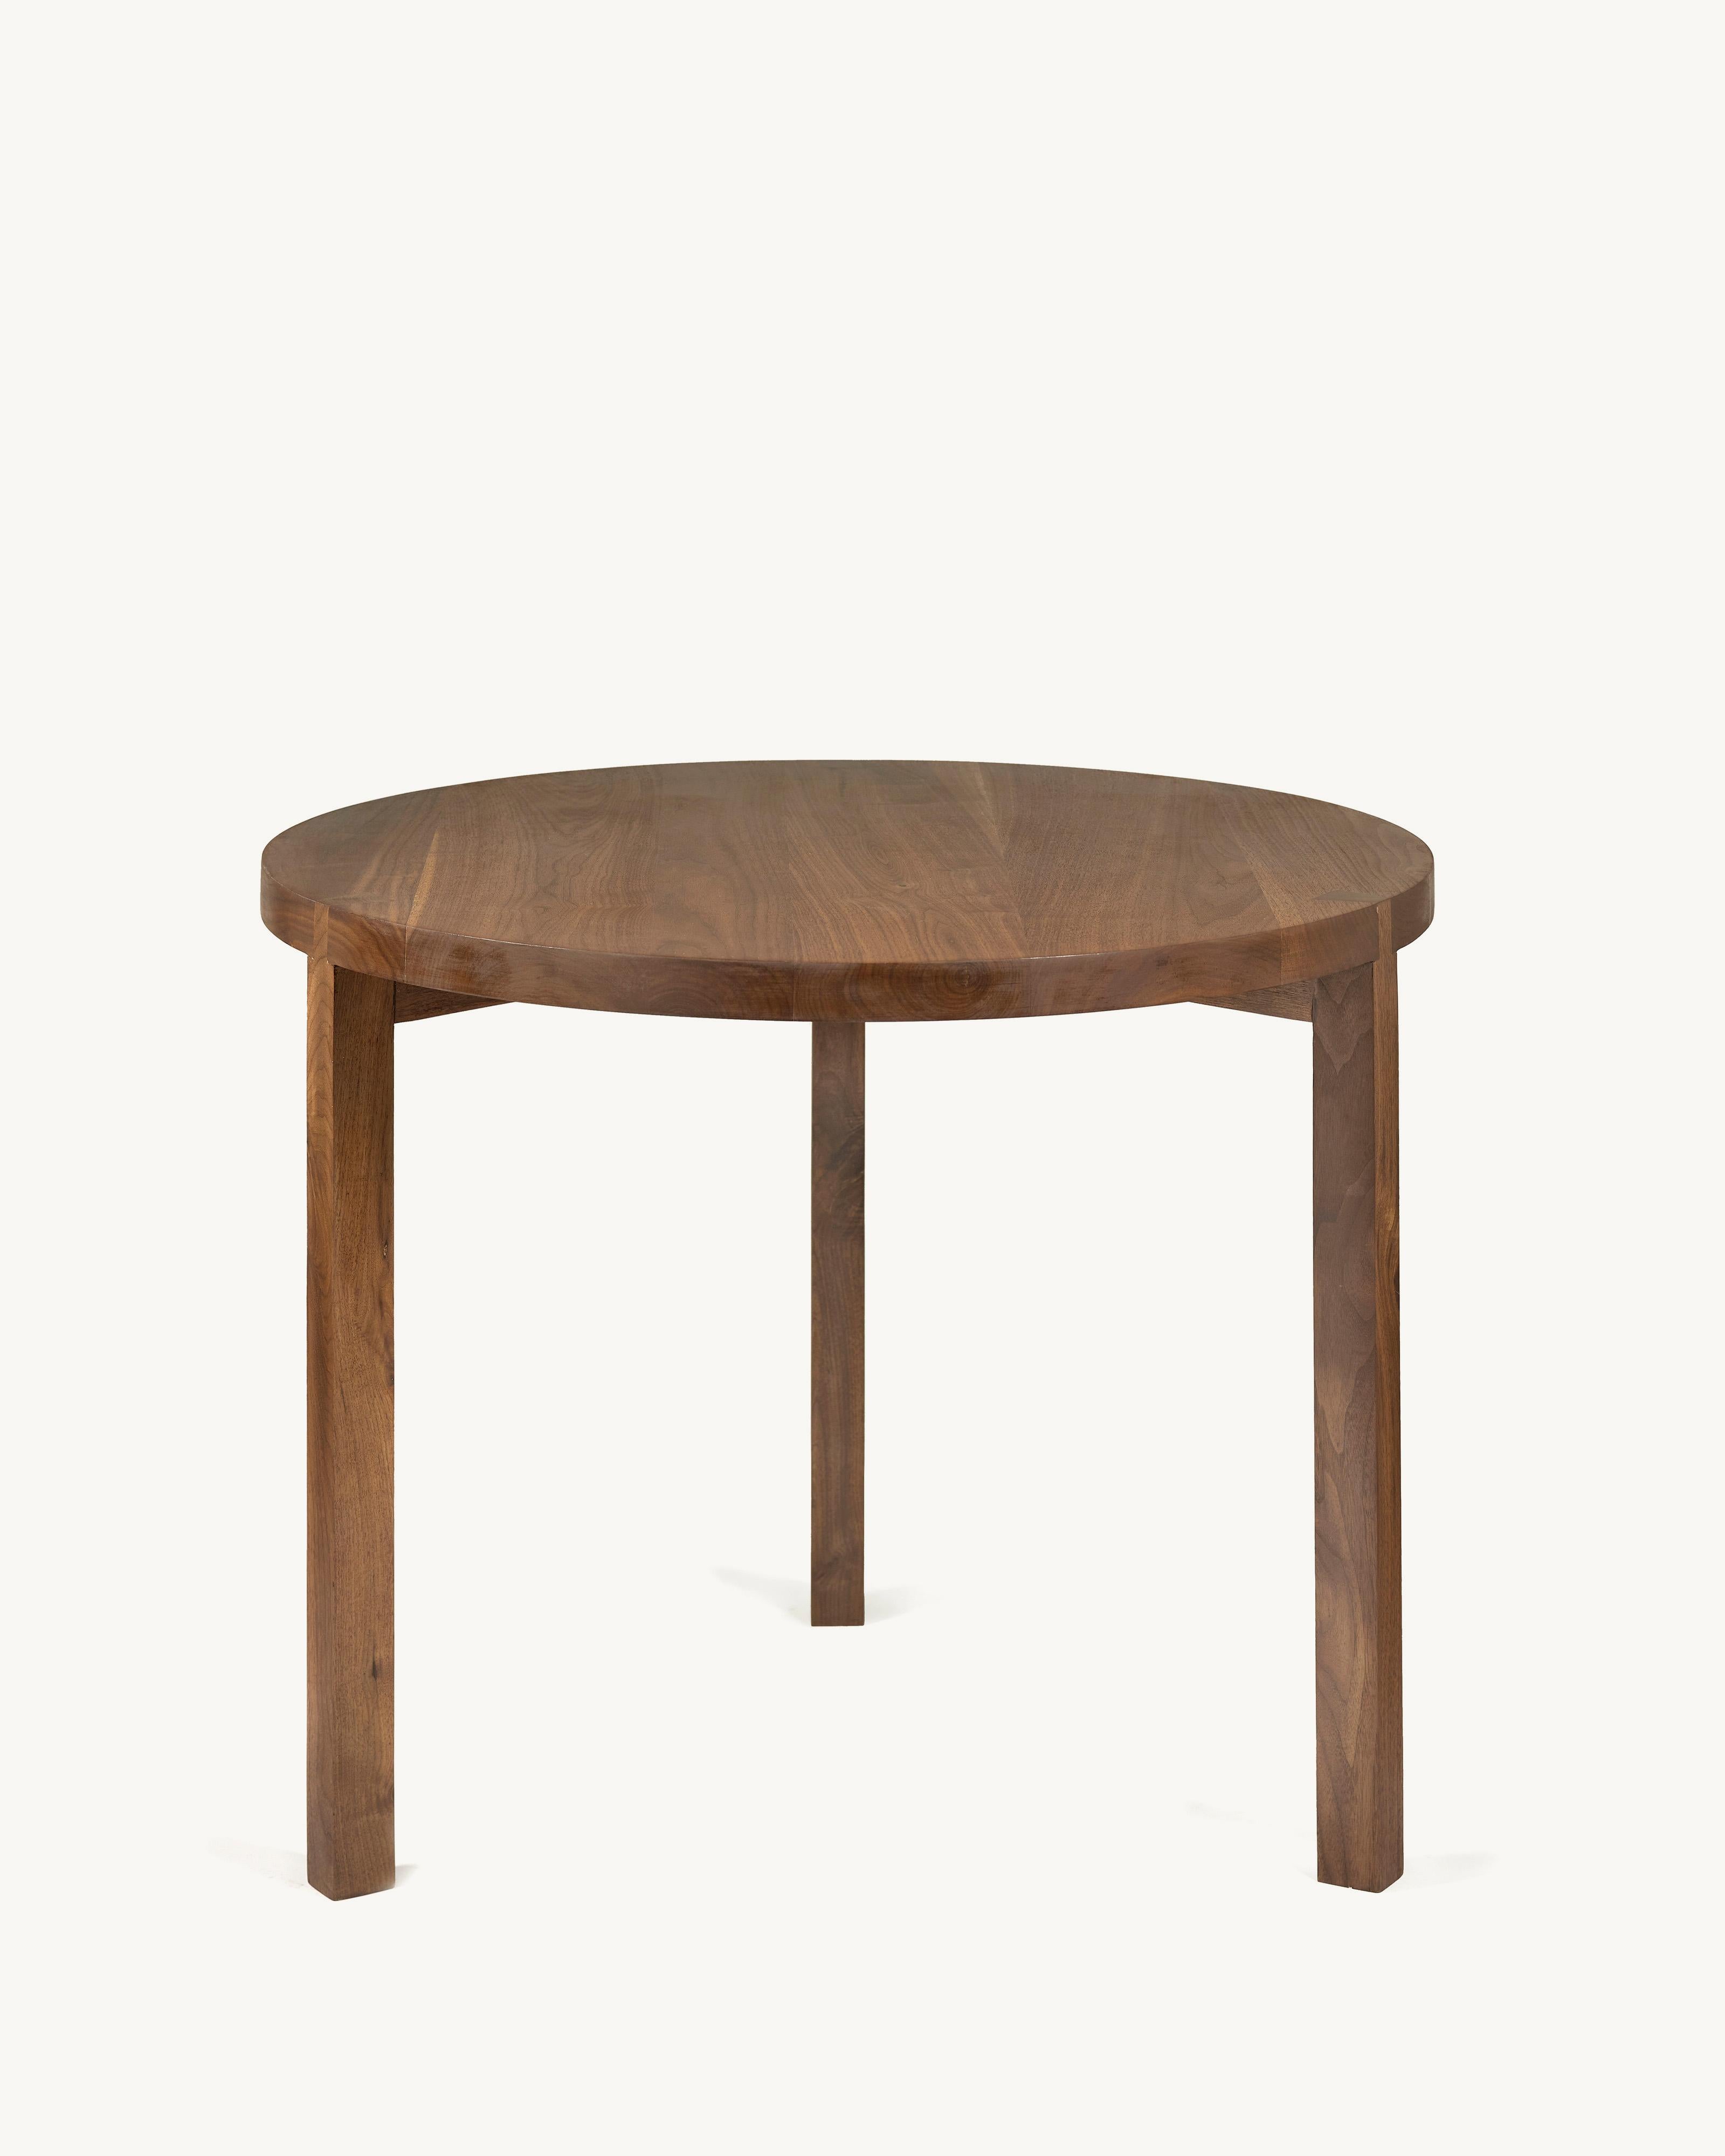 Belgian Contemporary Dining Table in Walnut 'Solid' by Atelier 365 x Valerie Objects For Sale